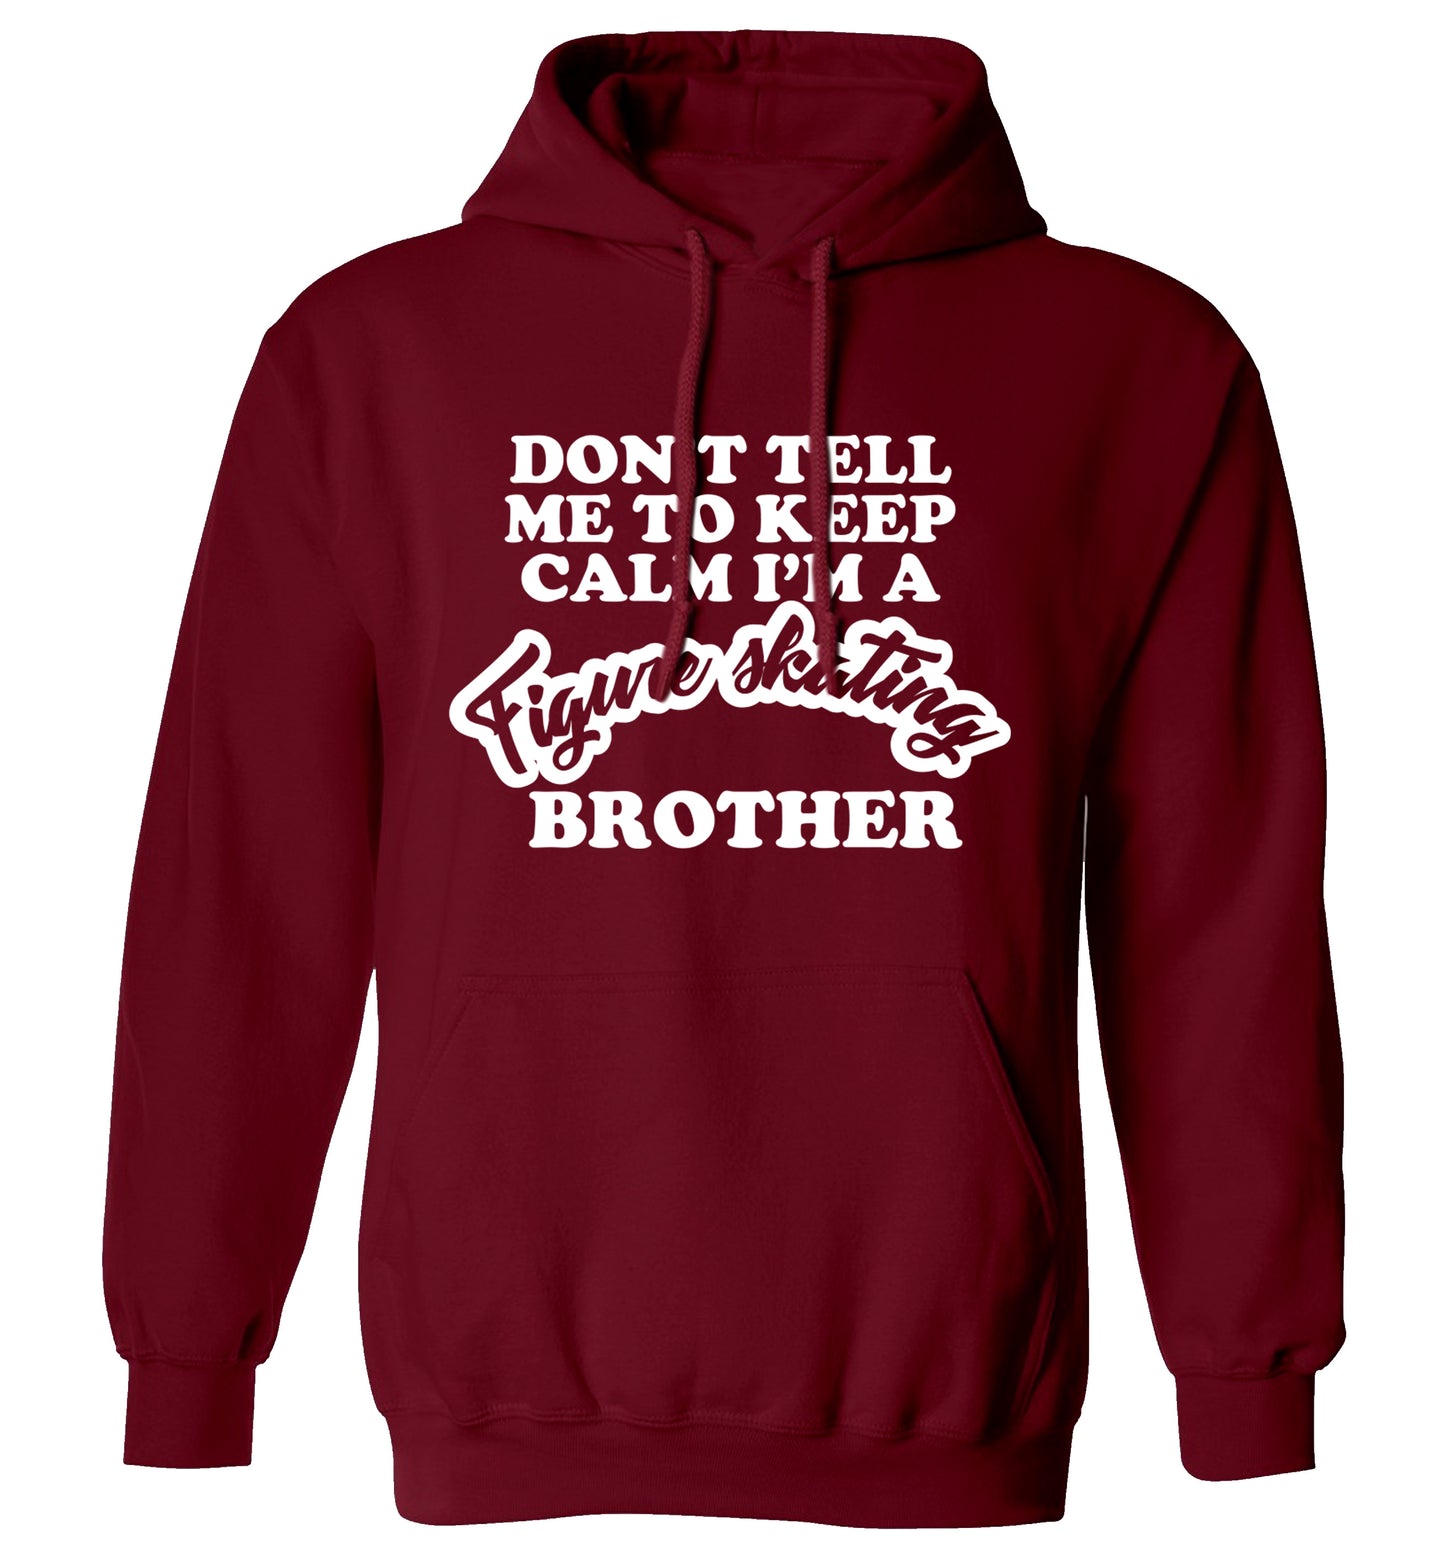 Don't tell me to keep calm I'm a figure skating brother adults unisexmaroon hoodie 2XL